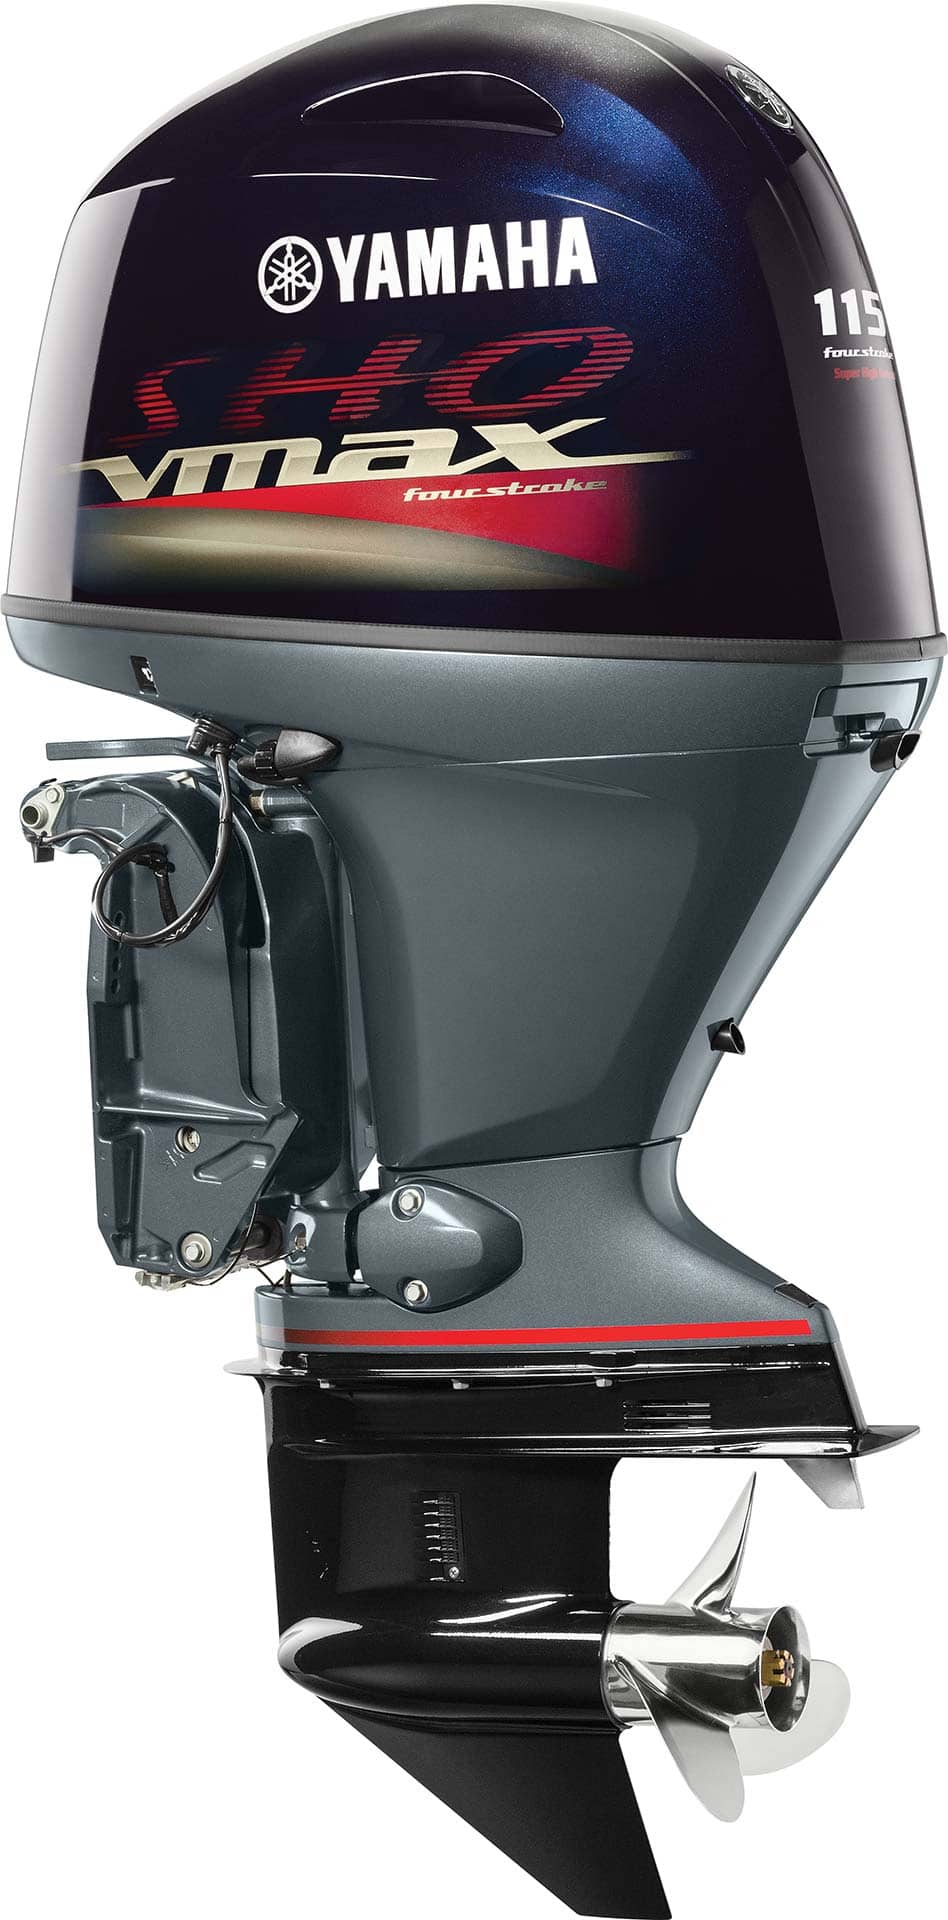 Yamaha Outboard VF115 InLine FourStroke • Cannons